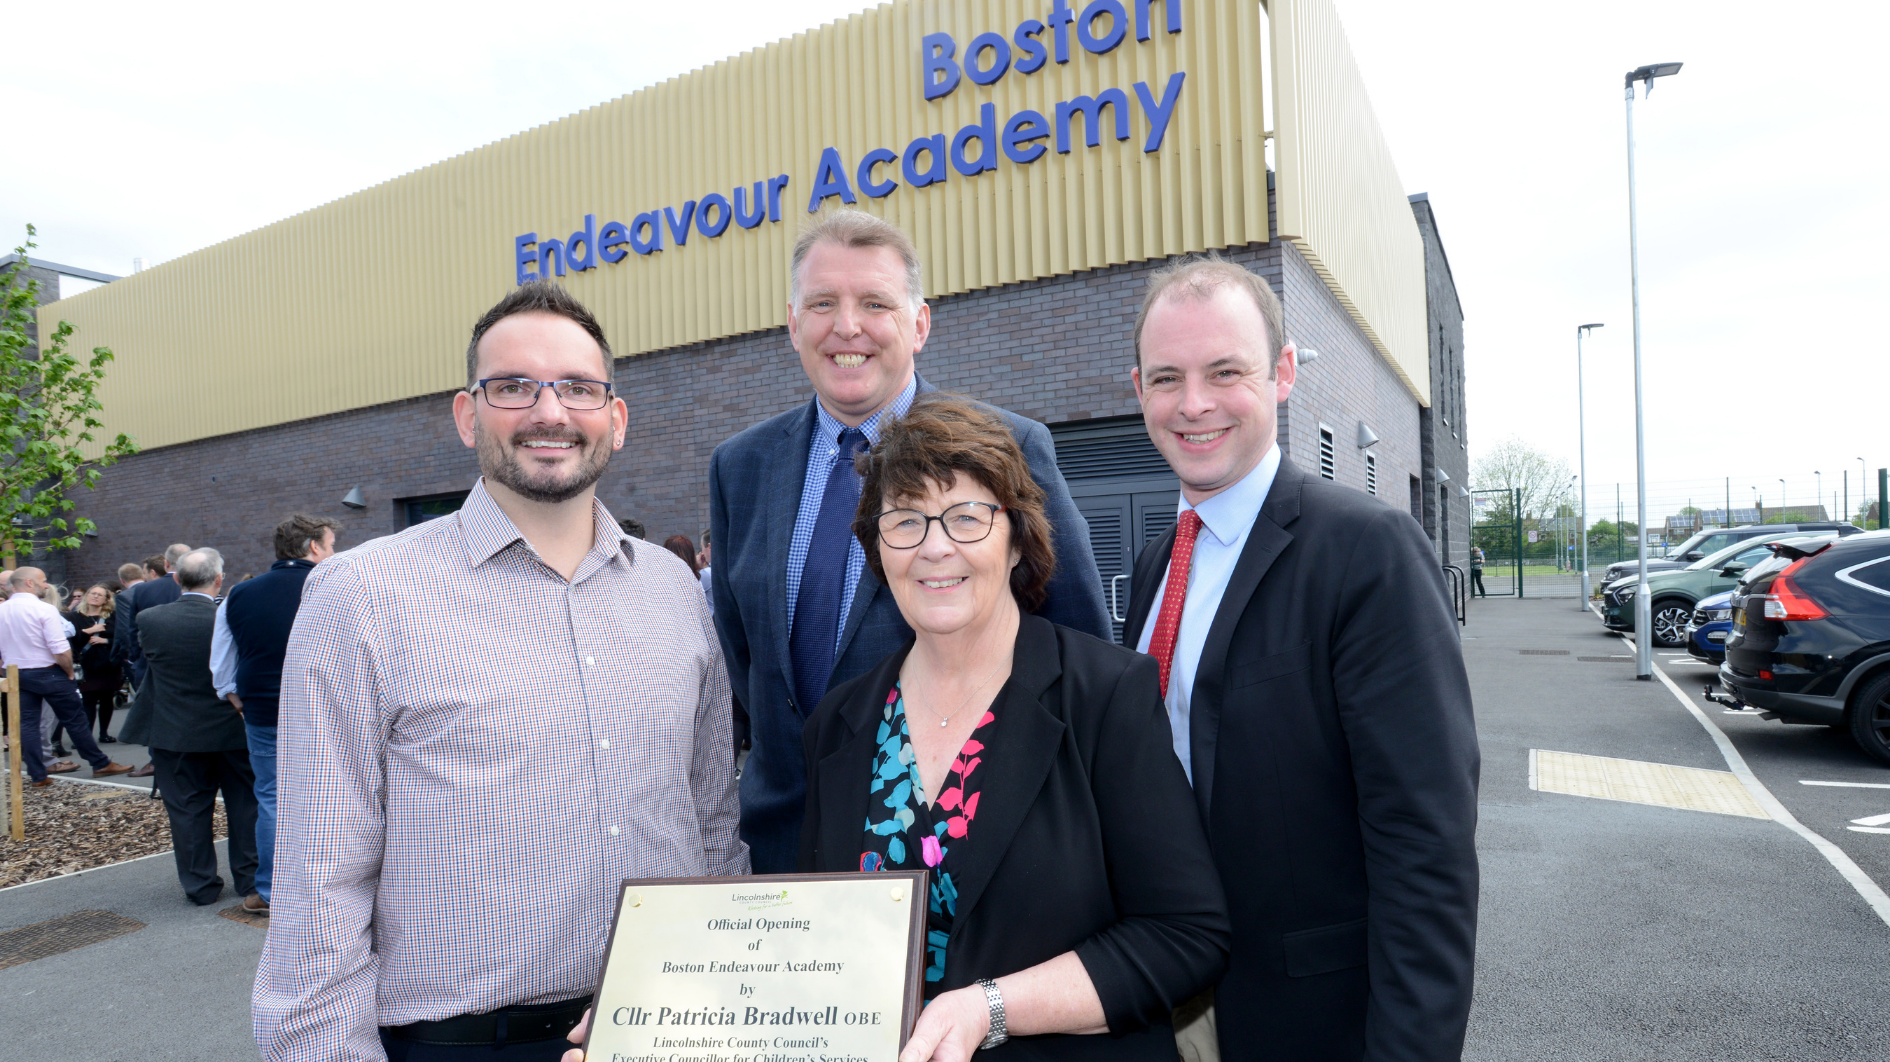 Boston Endeavour Academy has marked its official opening